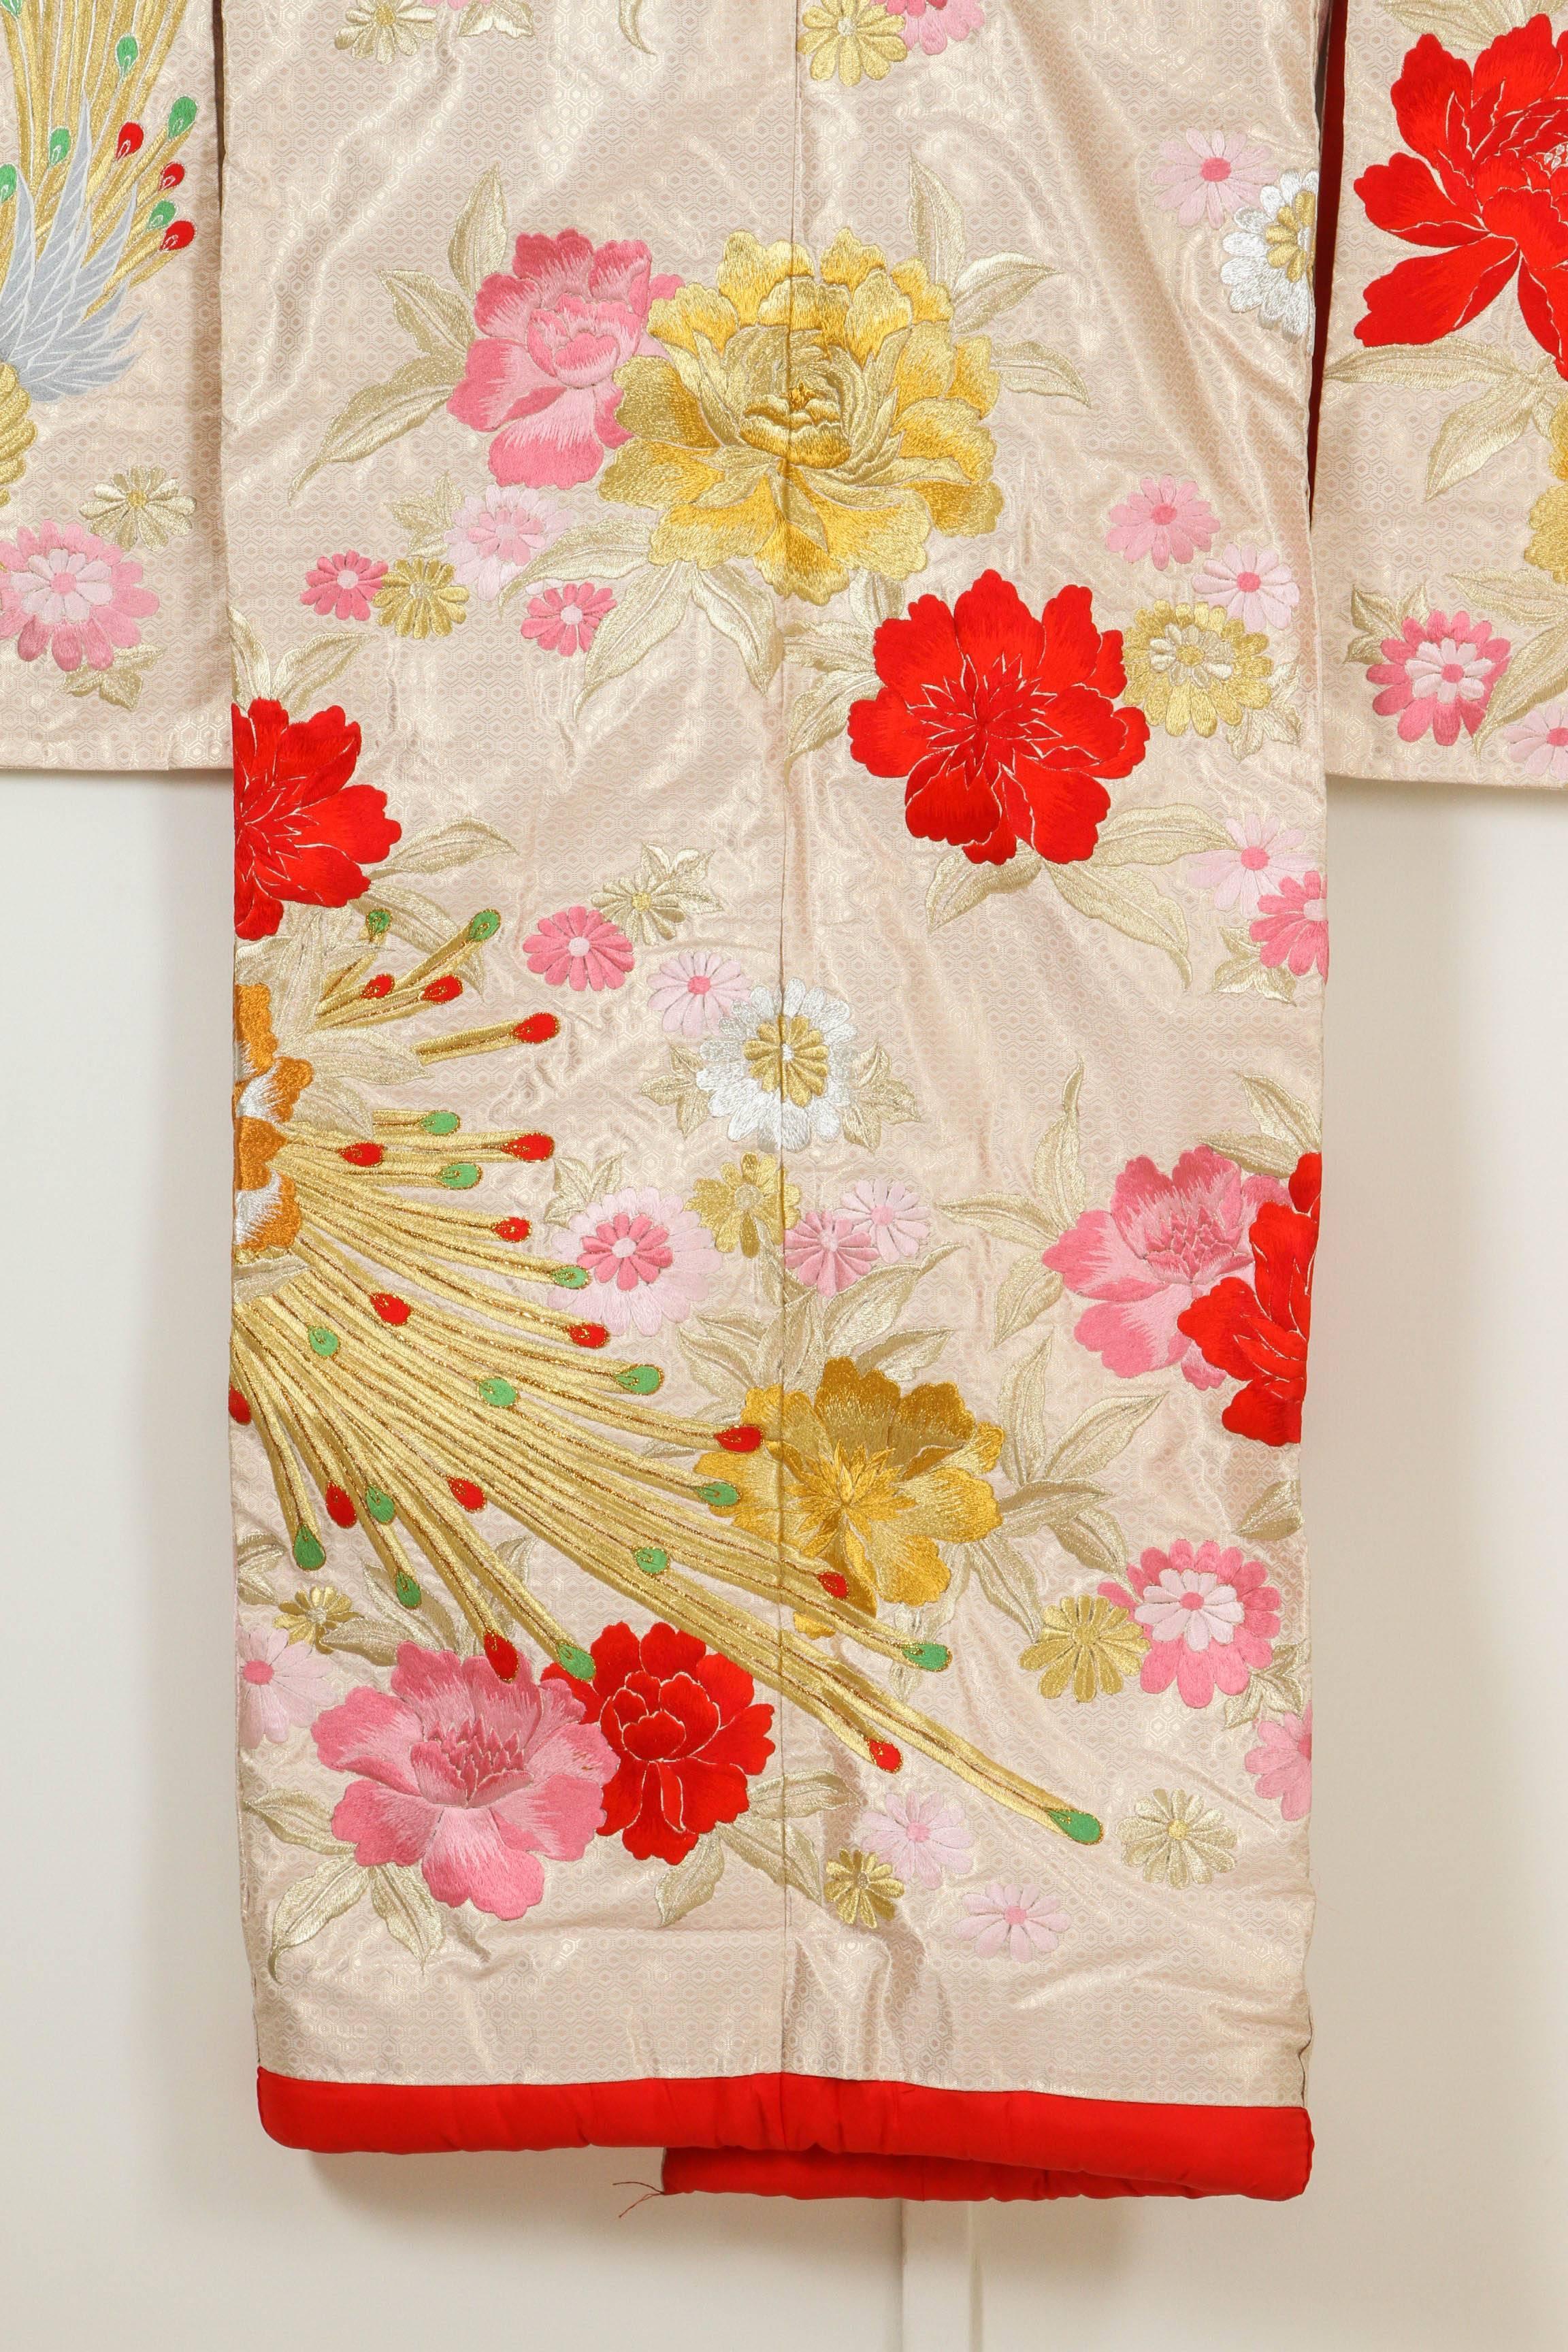 Vintage Kimono Silk Brocade Japanese Ceremonial Gown In Good Condition For Sale In North Hollywood, CA